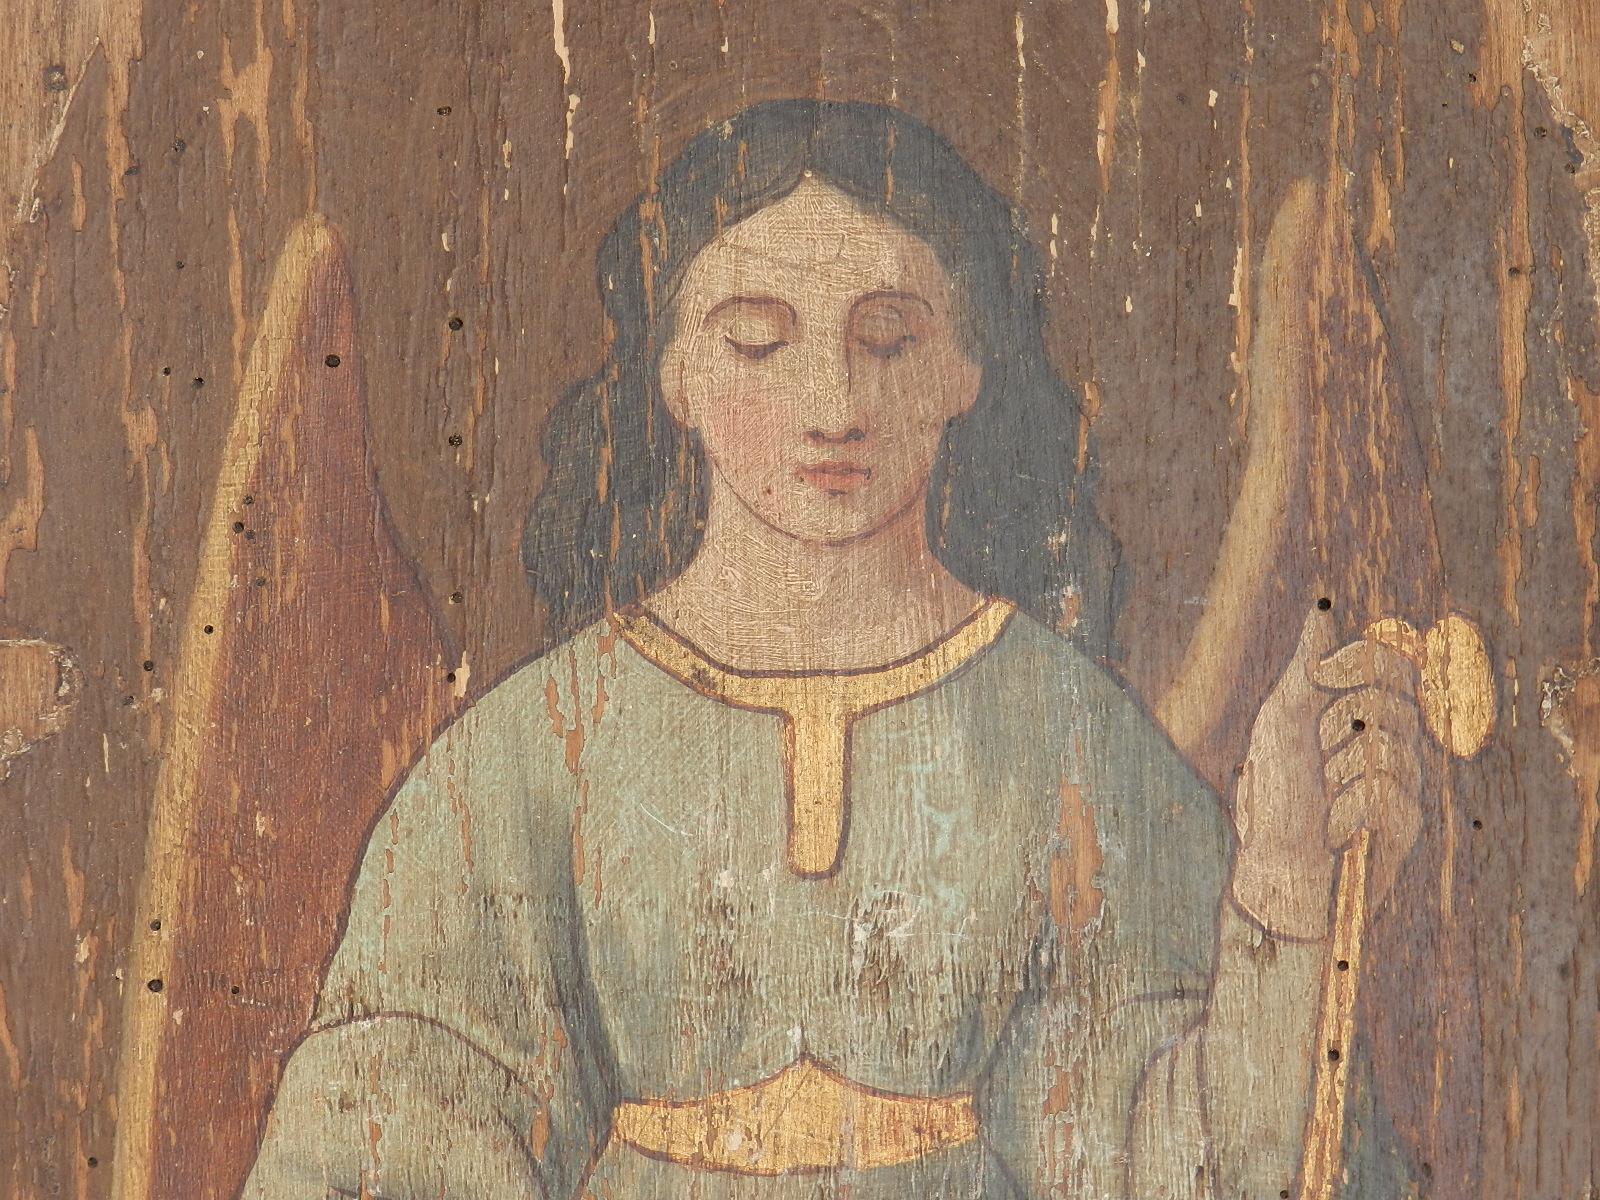 Two Antique Paintings Angels all Original Epoque on 18th Century Wood Panels Ecclesiastic
French provincial
Naive primitive and absolutely charming
Decorative and full of character
Pair of Panels probably originally from a piece of Church Furniture